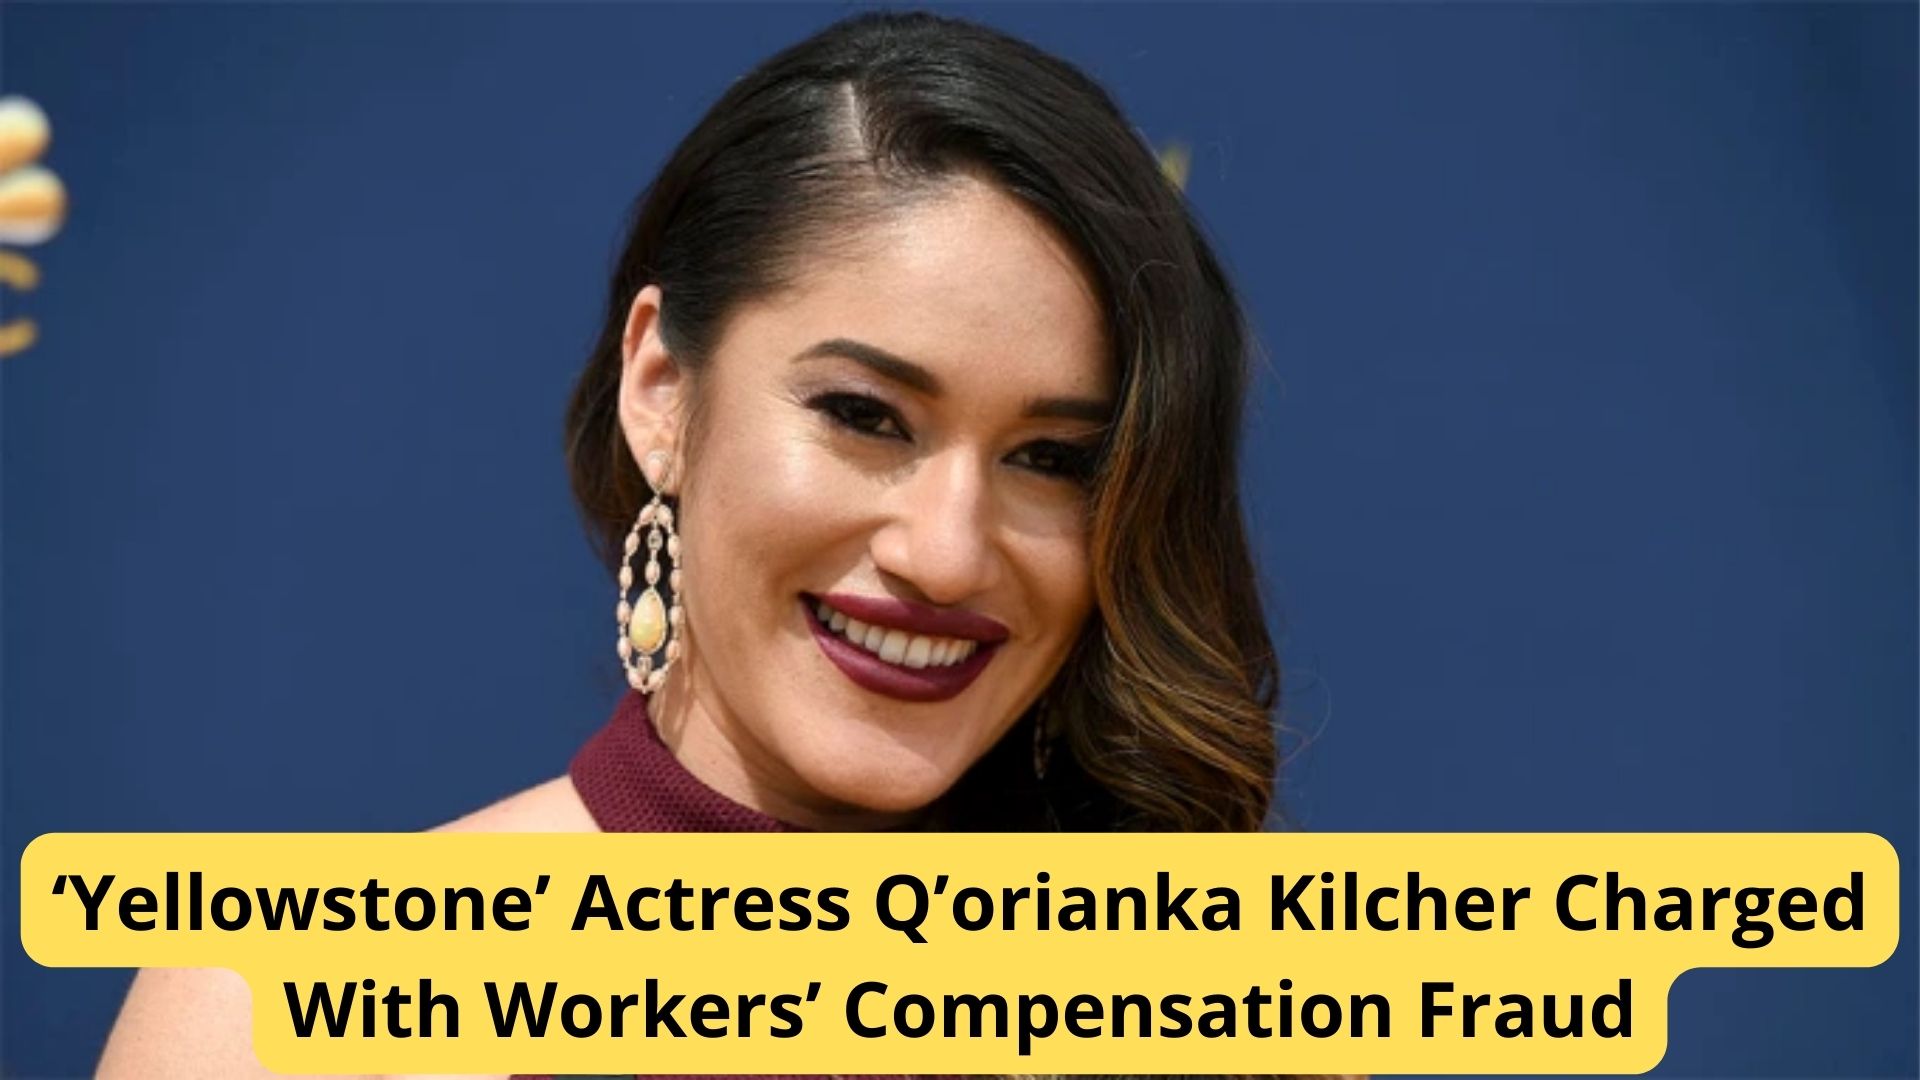 ‘Yellowstone’ Actress Q’orianka Kilcher Charged With Workers’ Compensation Fraud